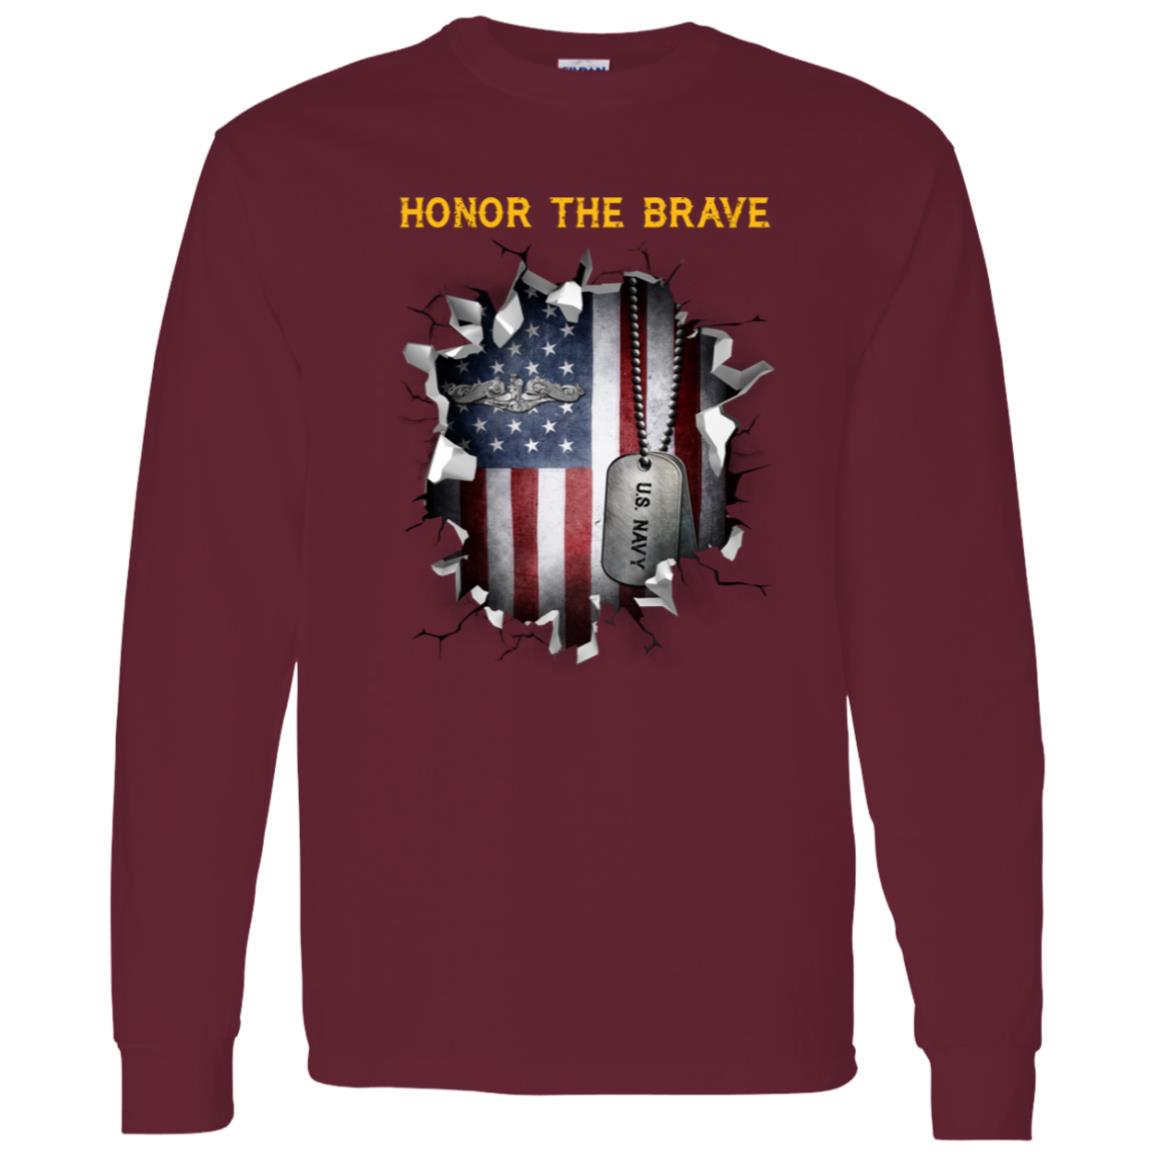 US Navy Submarine Enlisted - Honor The Brave Front Shirt